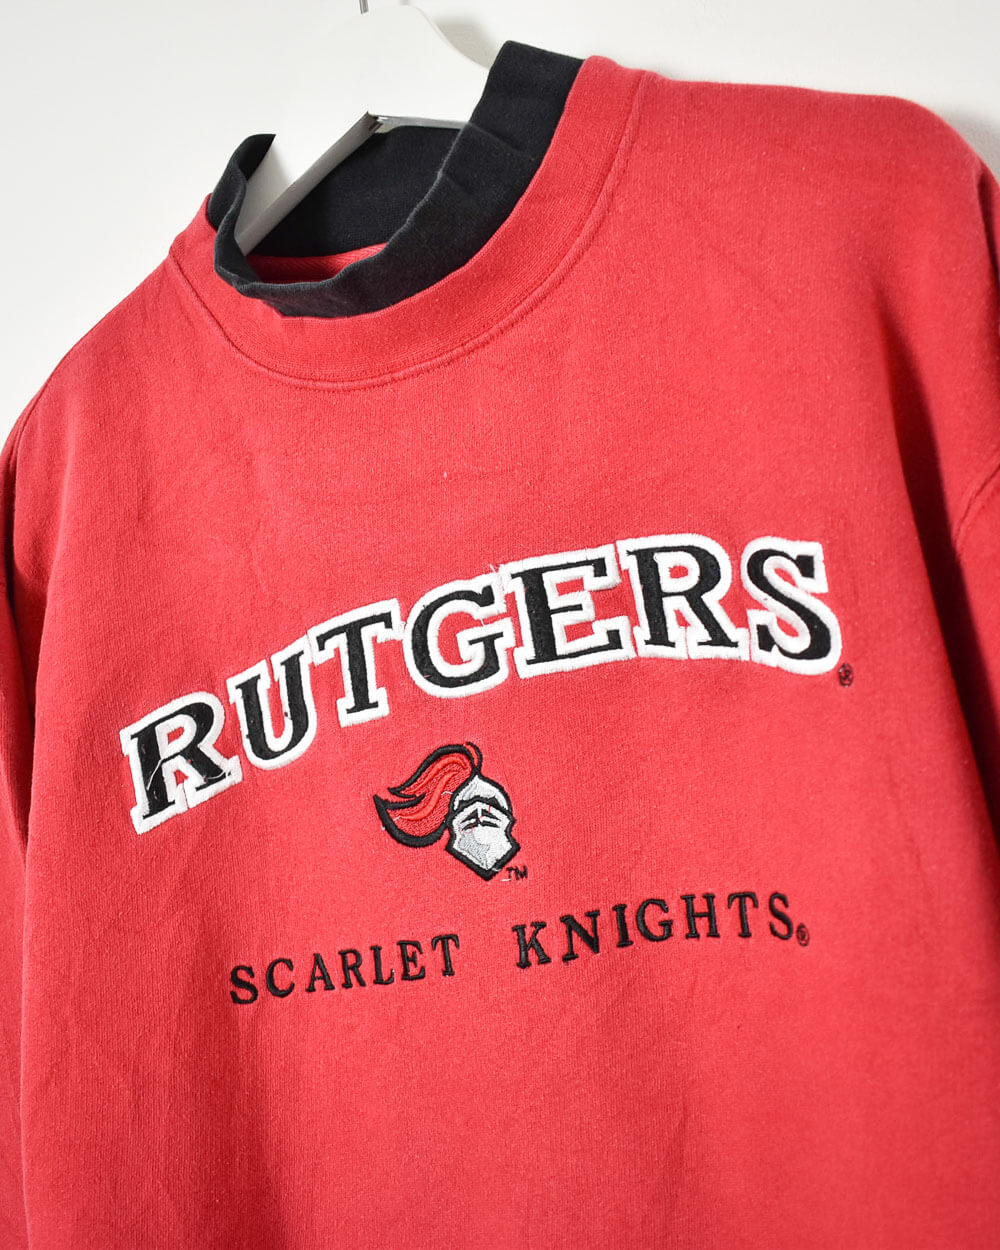 Caore Athletic Rutgers Scarlet Knights Sweatshirt - Small - Domno Vintage 90s, 80s, 00s Retro and Vintage Clothing 